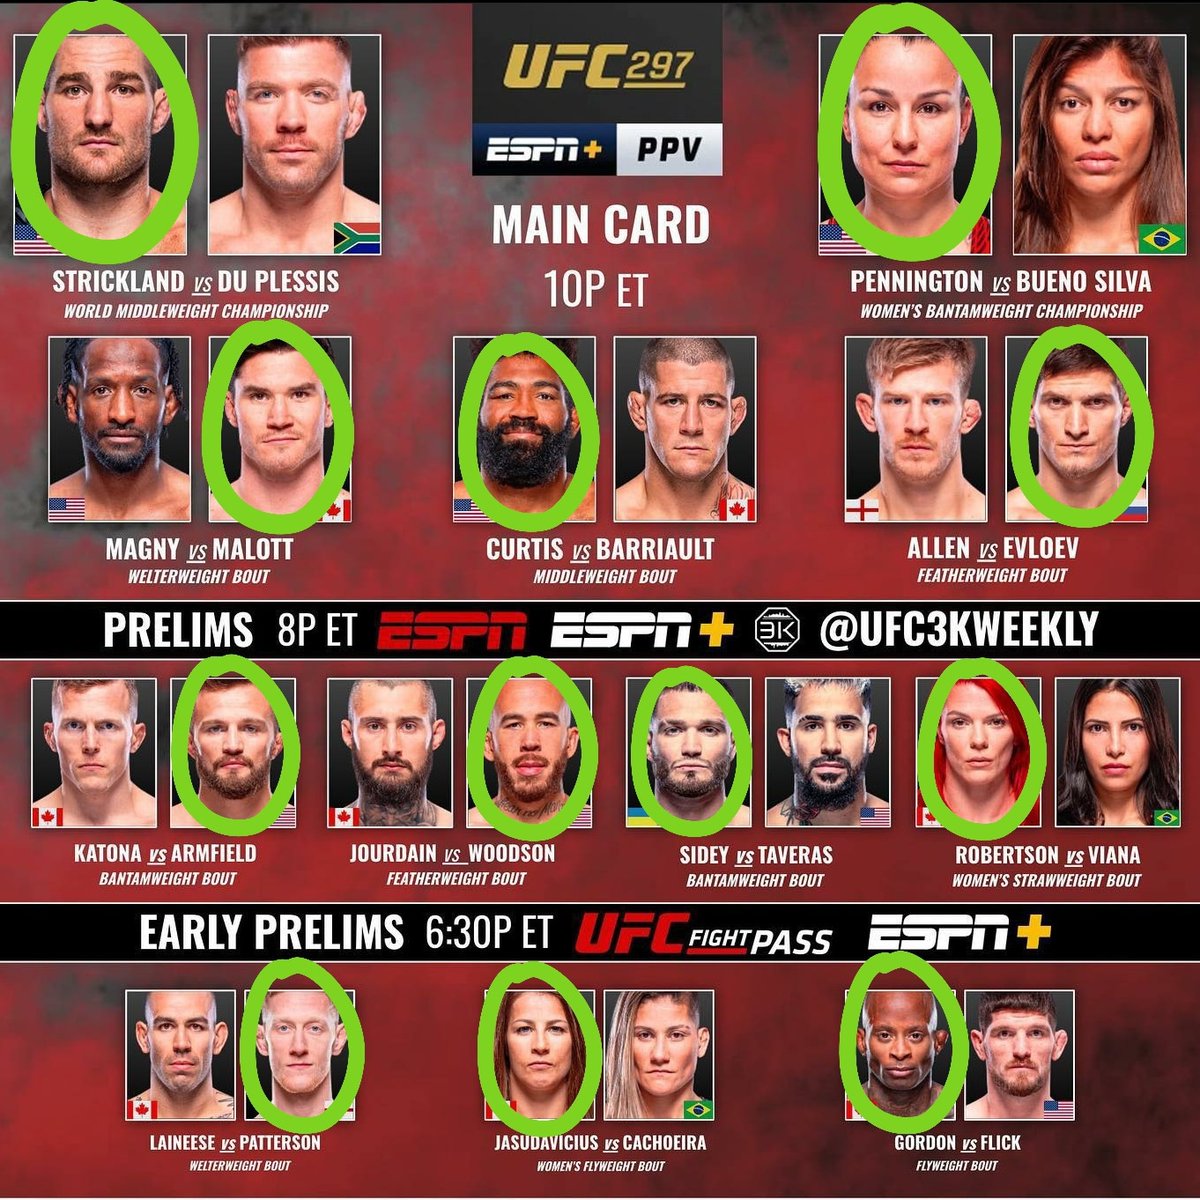 Picks NOT bets for #UFC297. This week has been quite rocky in my life so a little behind so tail with caution!!! #sportsbetting #fightpicks #UFC300 #bettingexpert #sportsbettingtips #ufclocks #freepicks #freebets #DraftKings #bettingtips #mma #UFC #bettingtwitter #ufctwitter